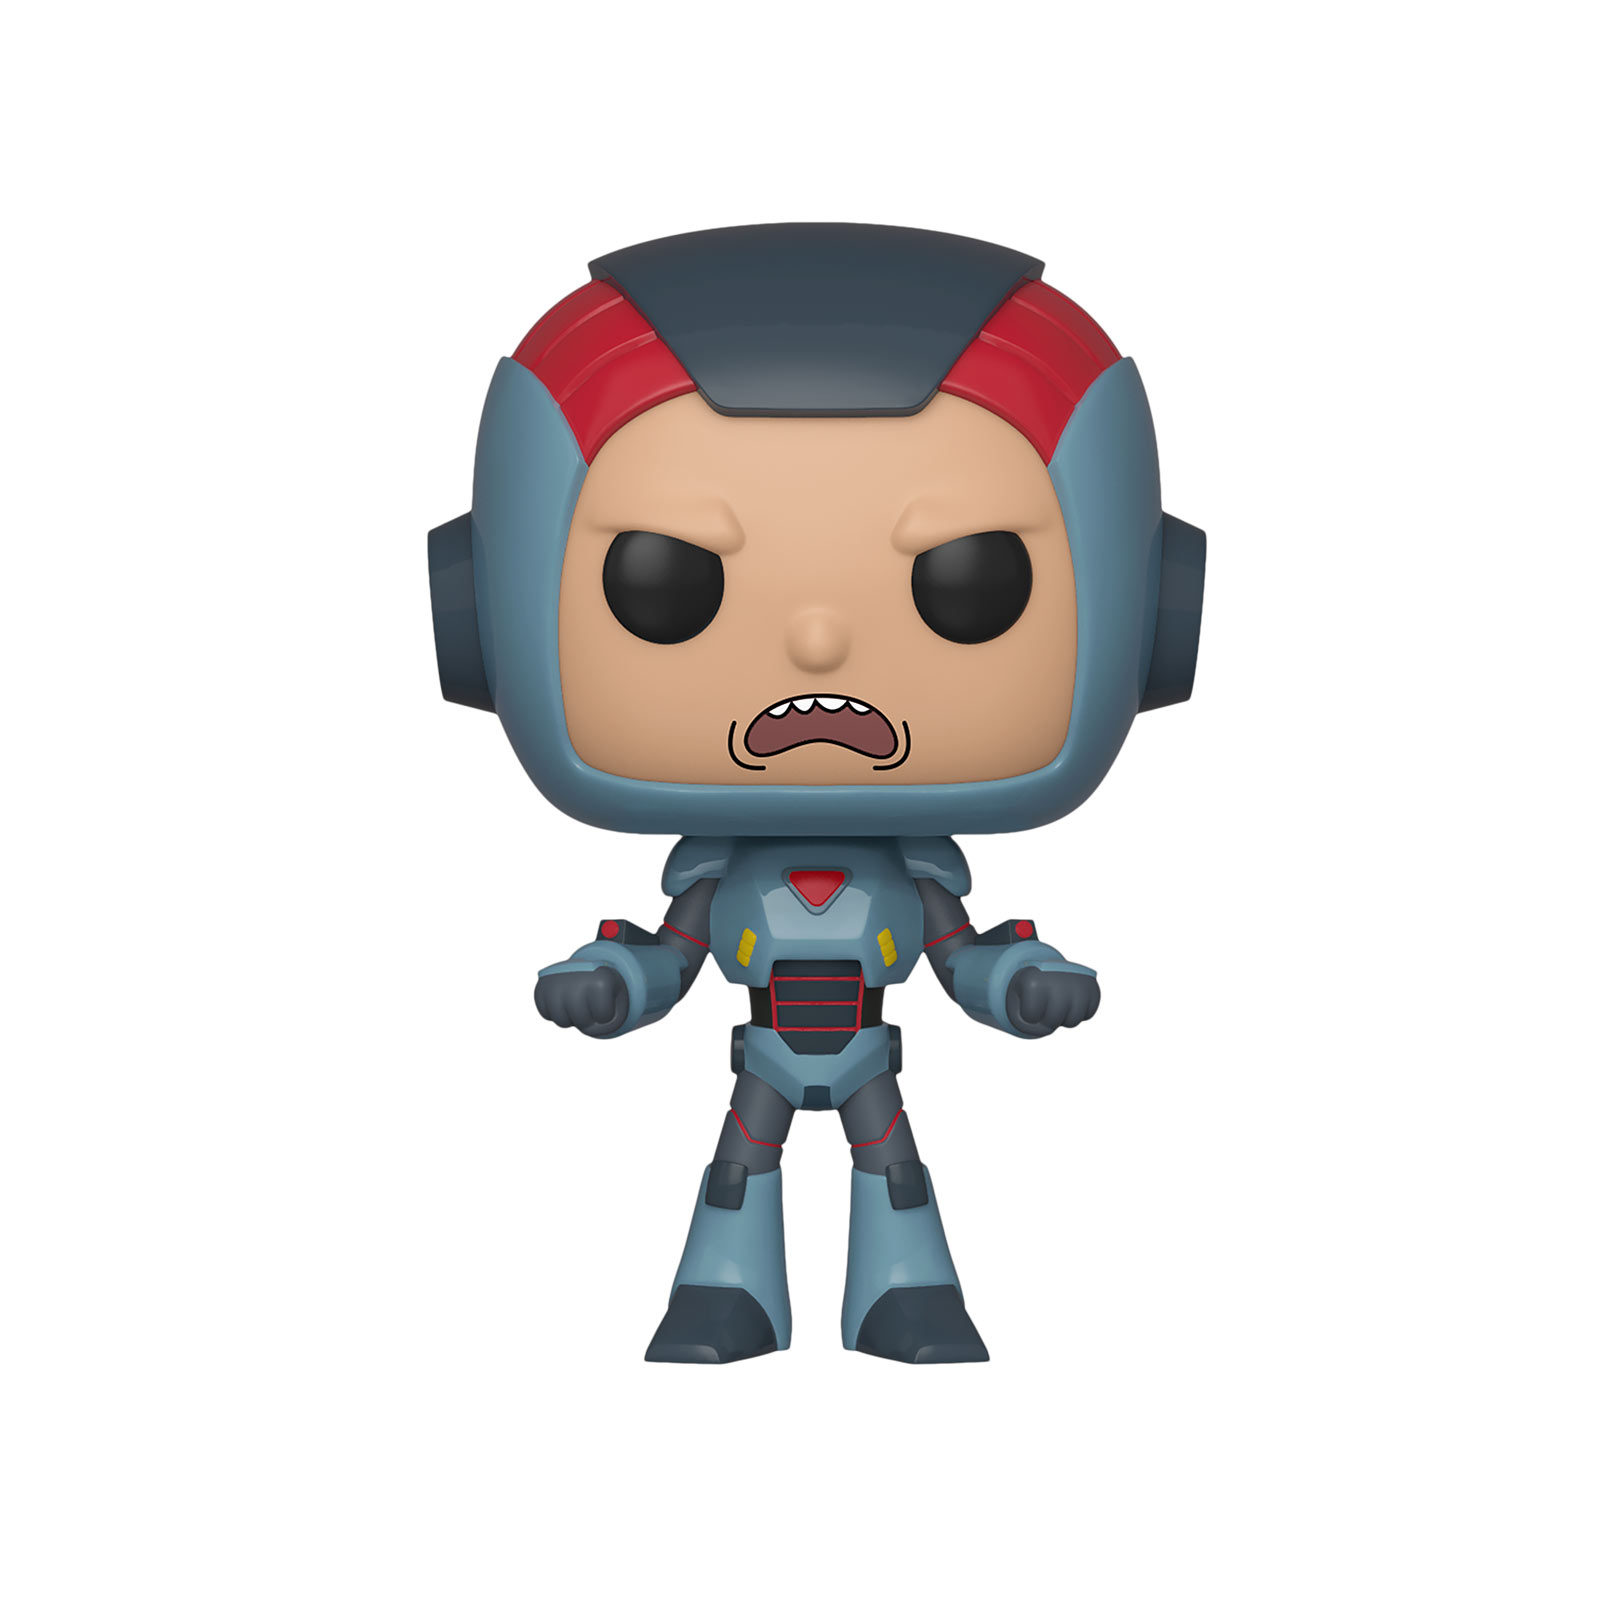 Rick and Morty - Purge Suit Morty Funko Pop Figur